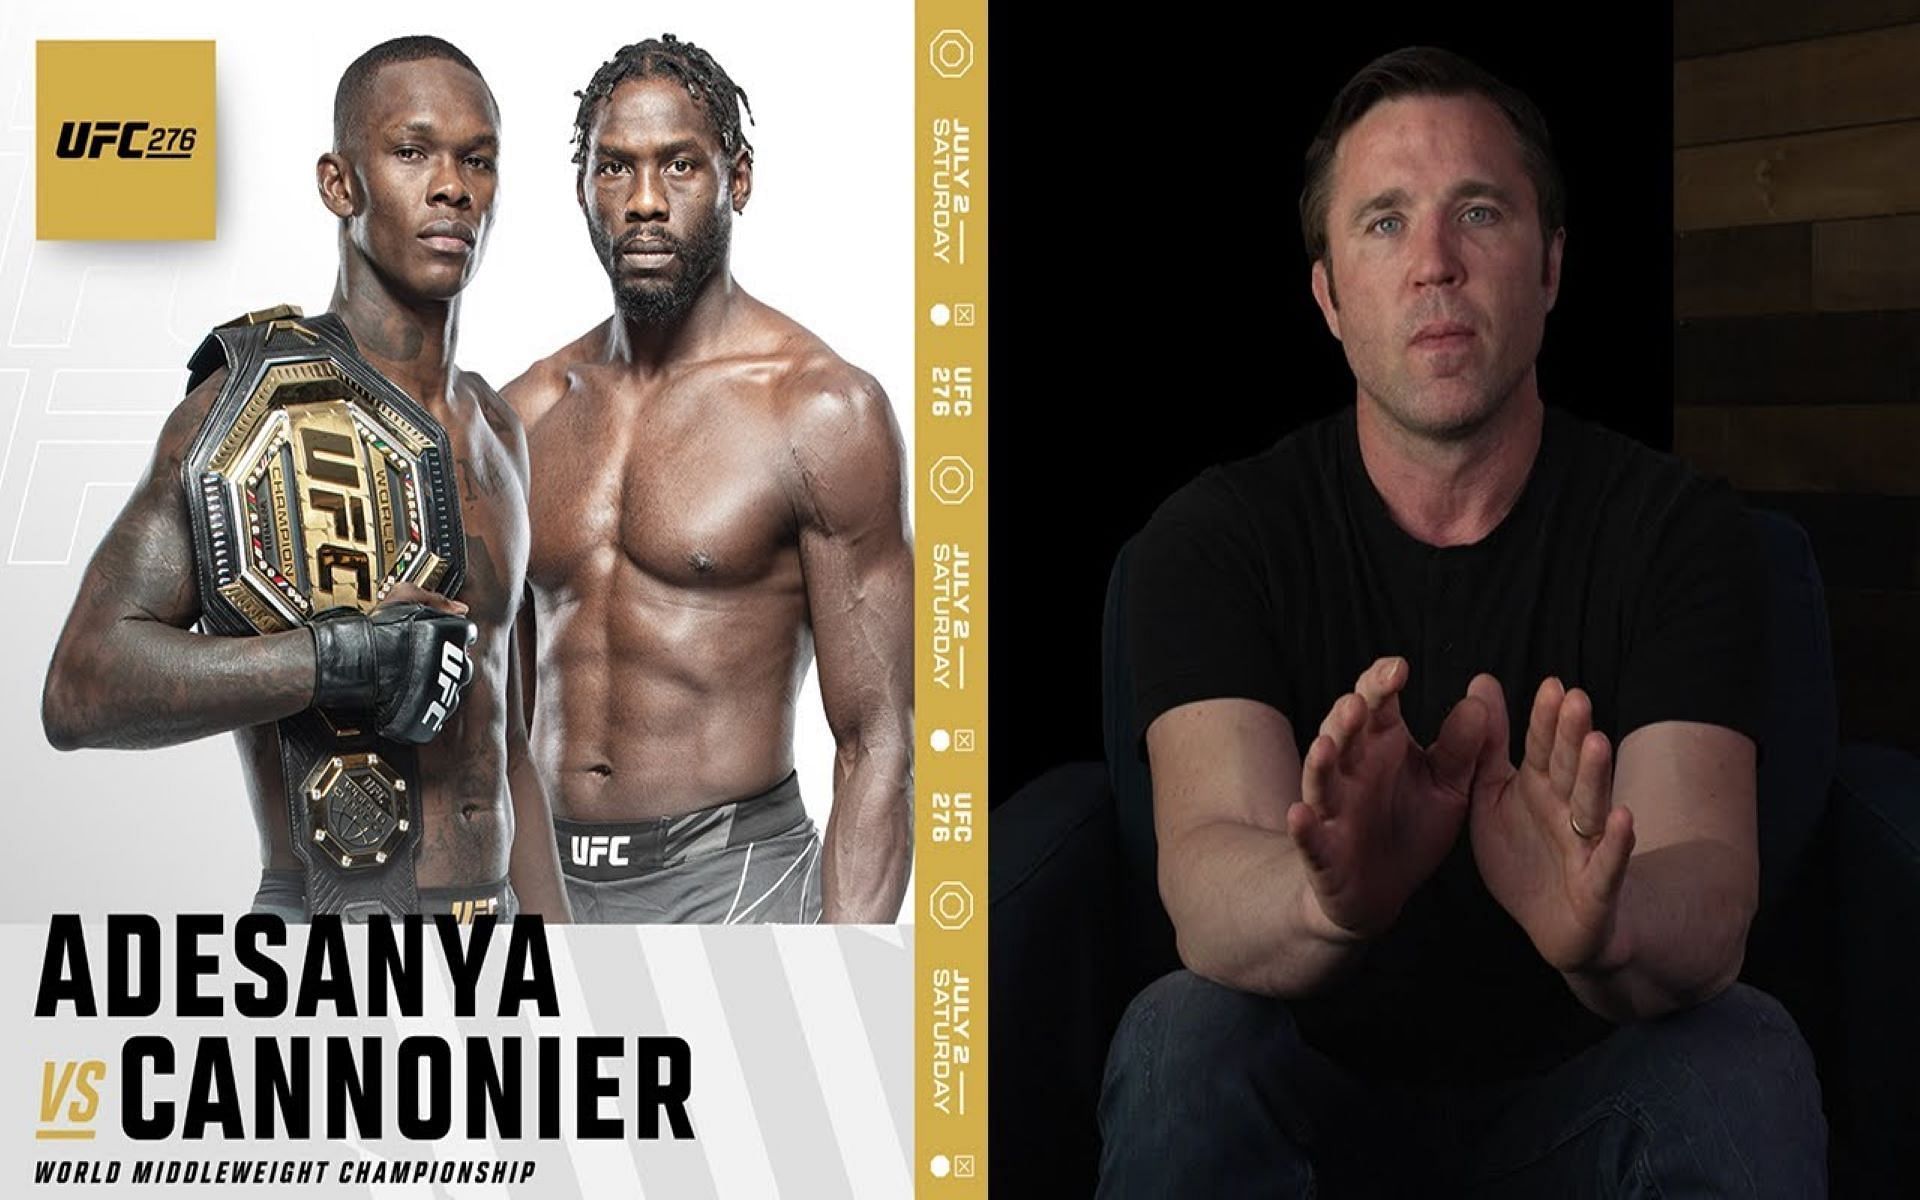 Israel Adesanya (L), Jared Cannonier (M), and Chael Sonnen (R) [Credits: Chael Sonnen Official YouTube]